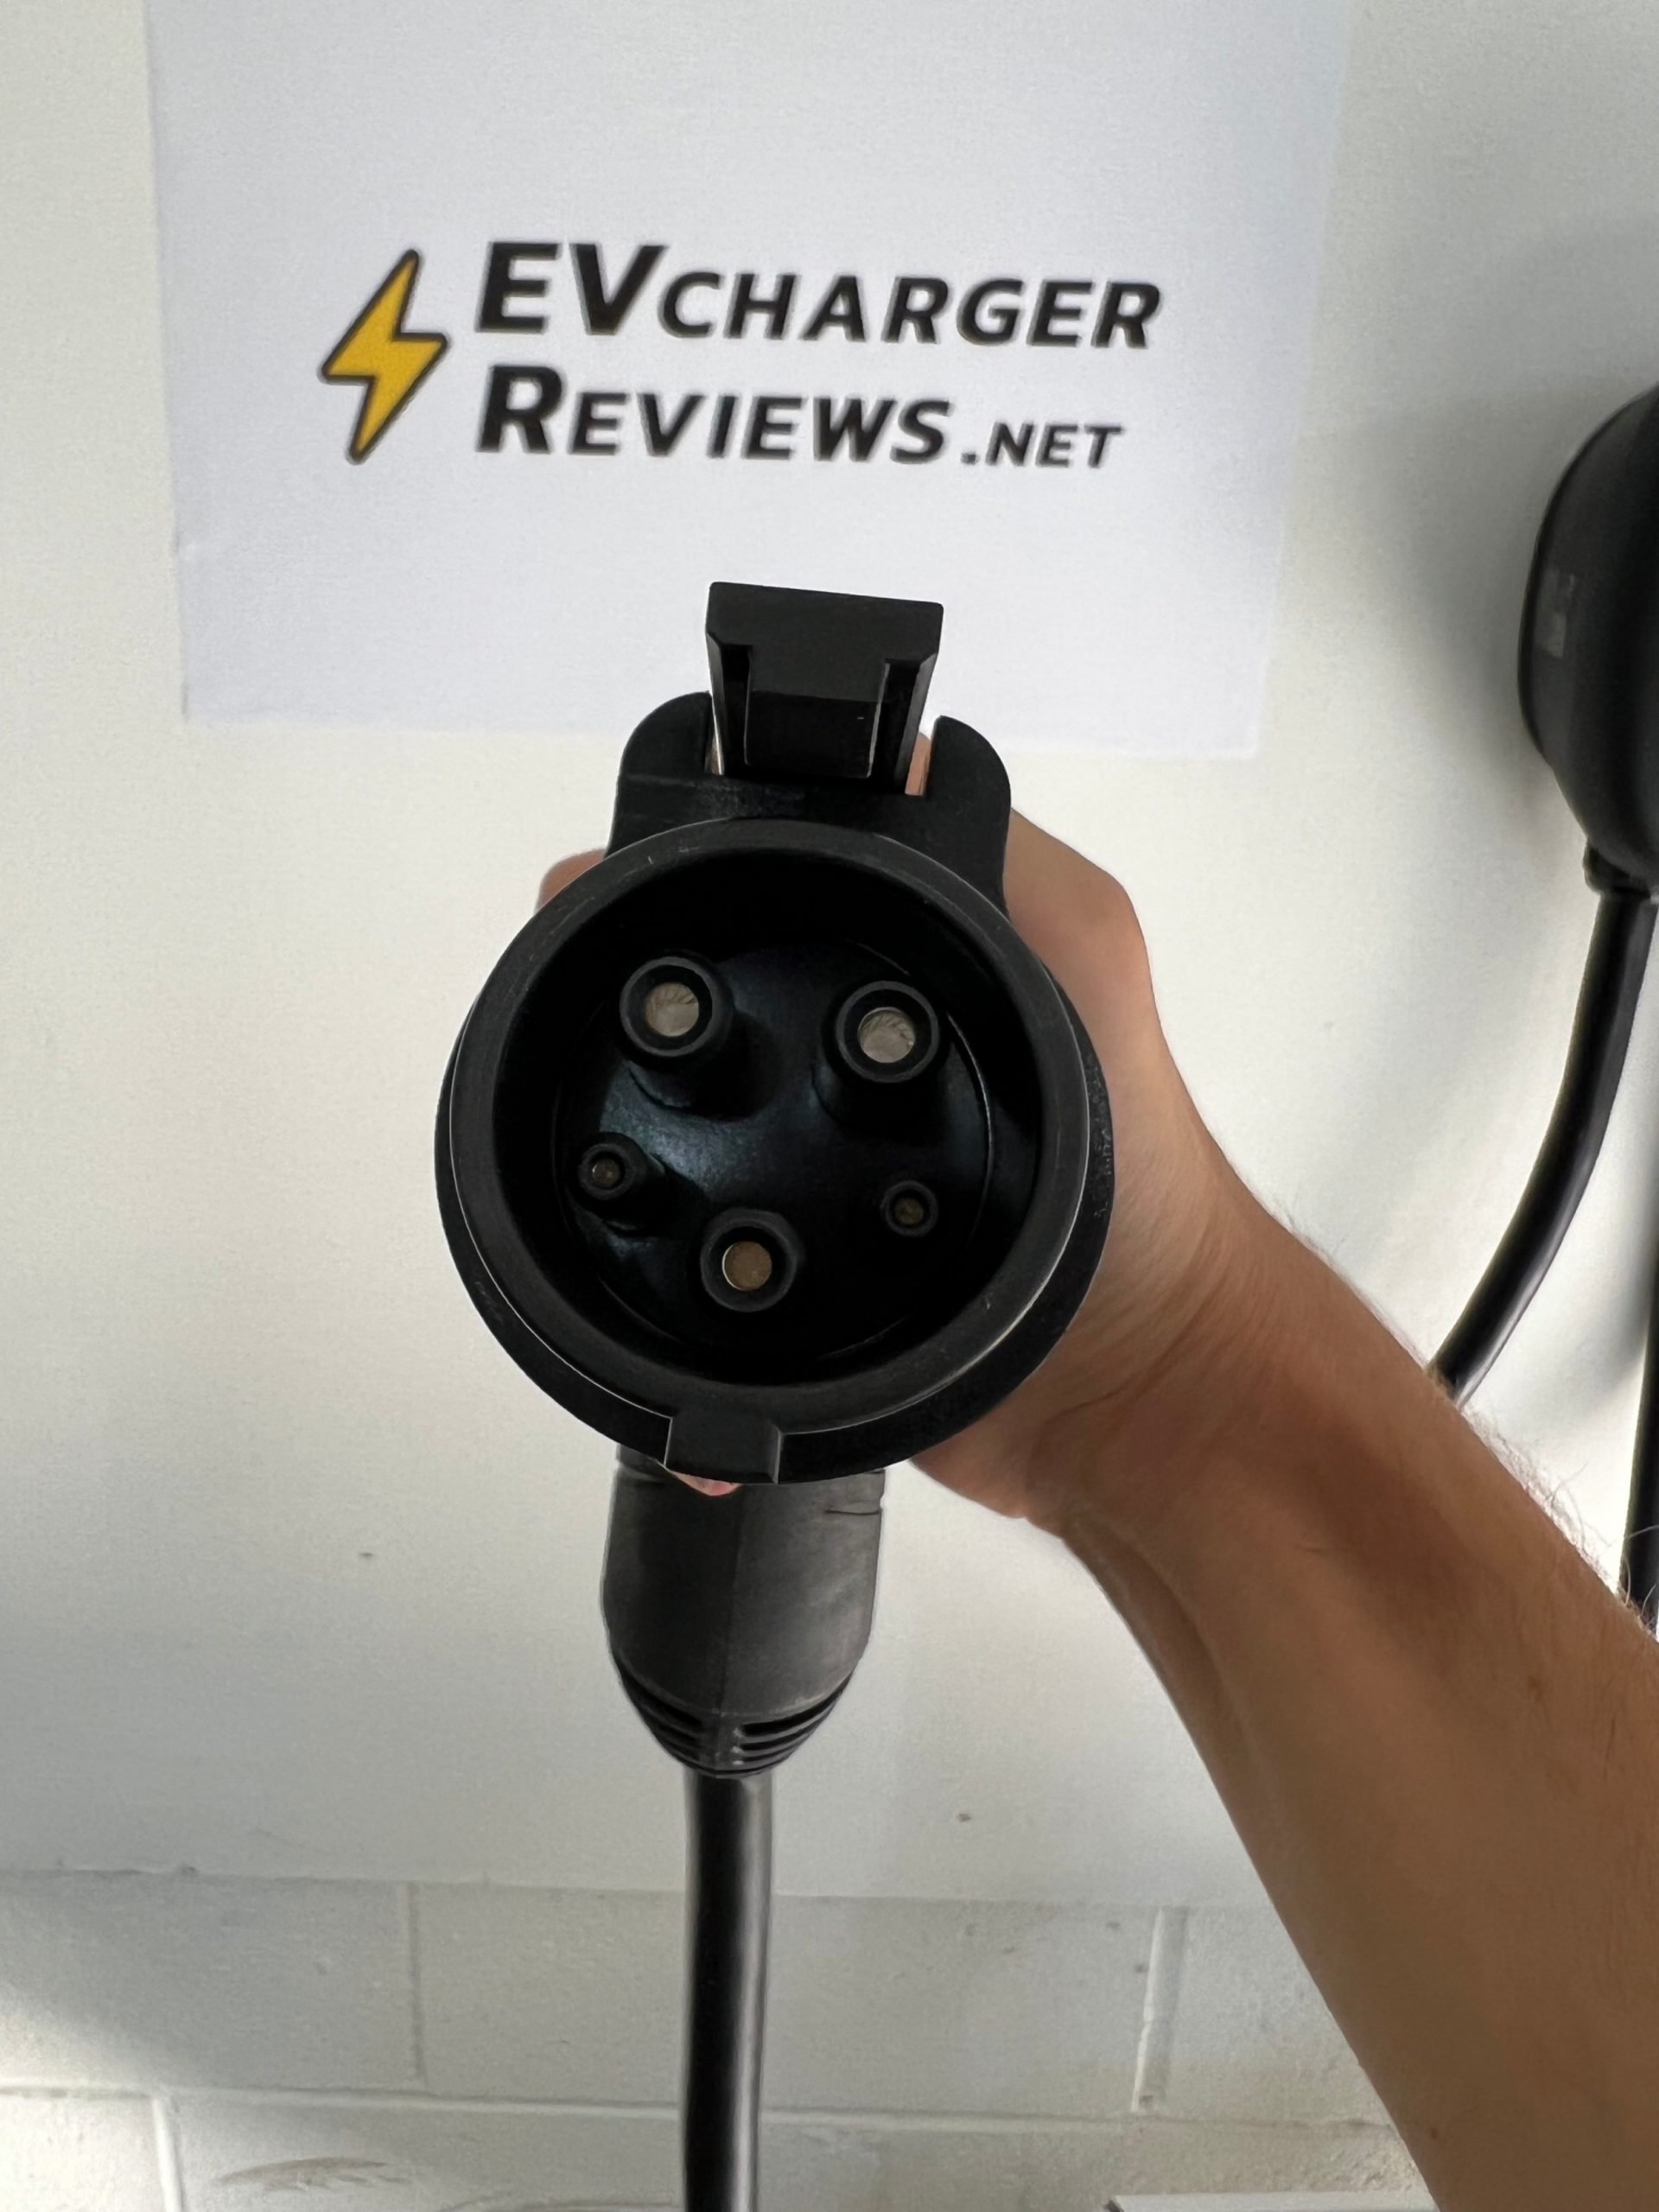 Wallbox Pulsar Plus 48 Amp Hardwired EVSE - CleanTechnica Review -  CleanTechnica